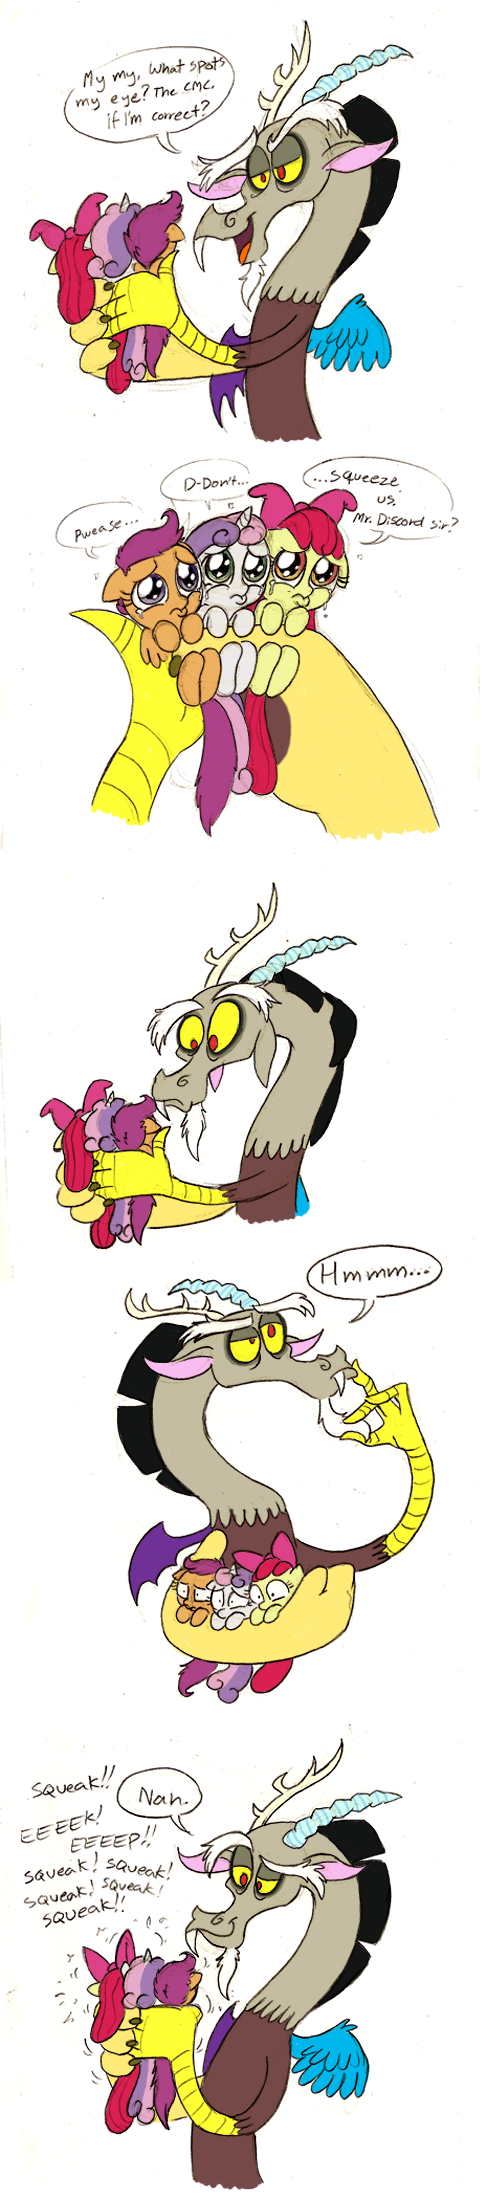 squeezin___it_or_not_to_squeezin___it_by_mickeymonster-d4nkcn3.png